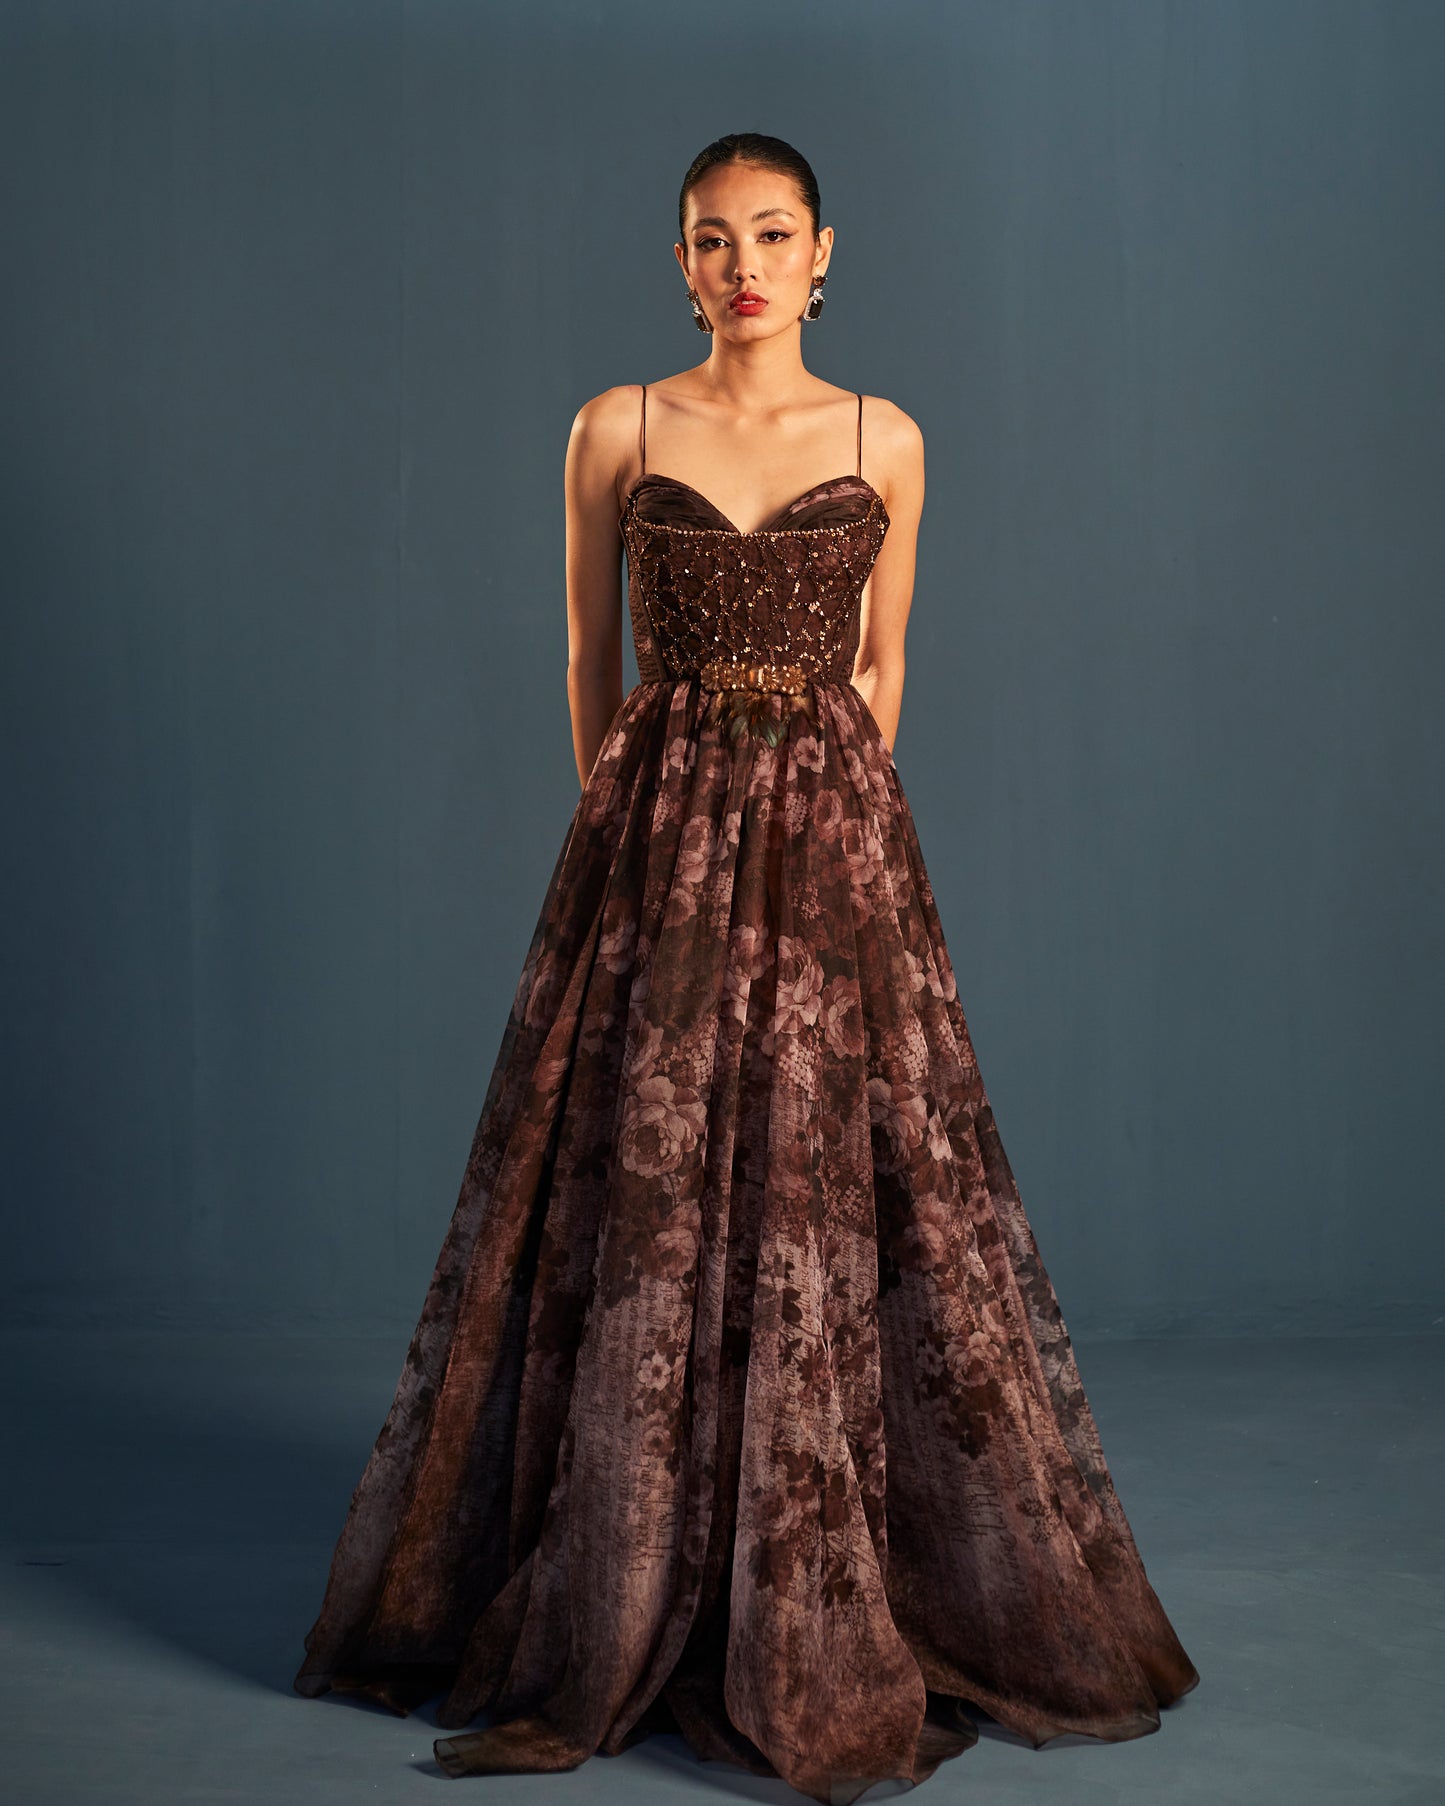 Floral print organza gown with embroidered bodice